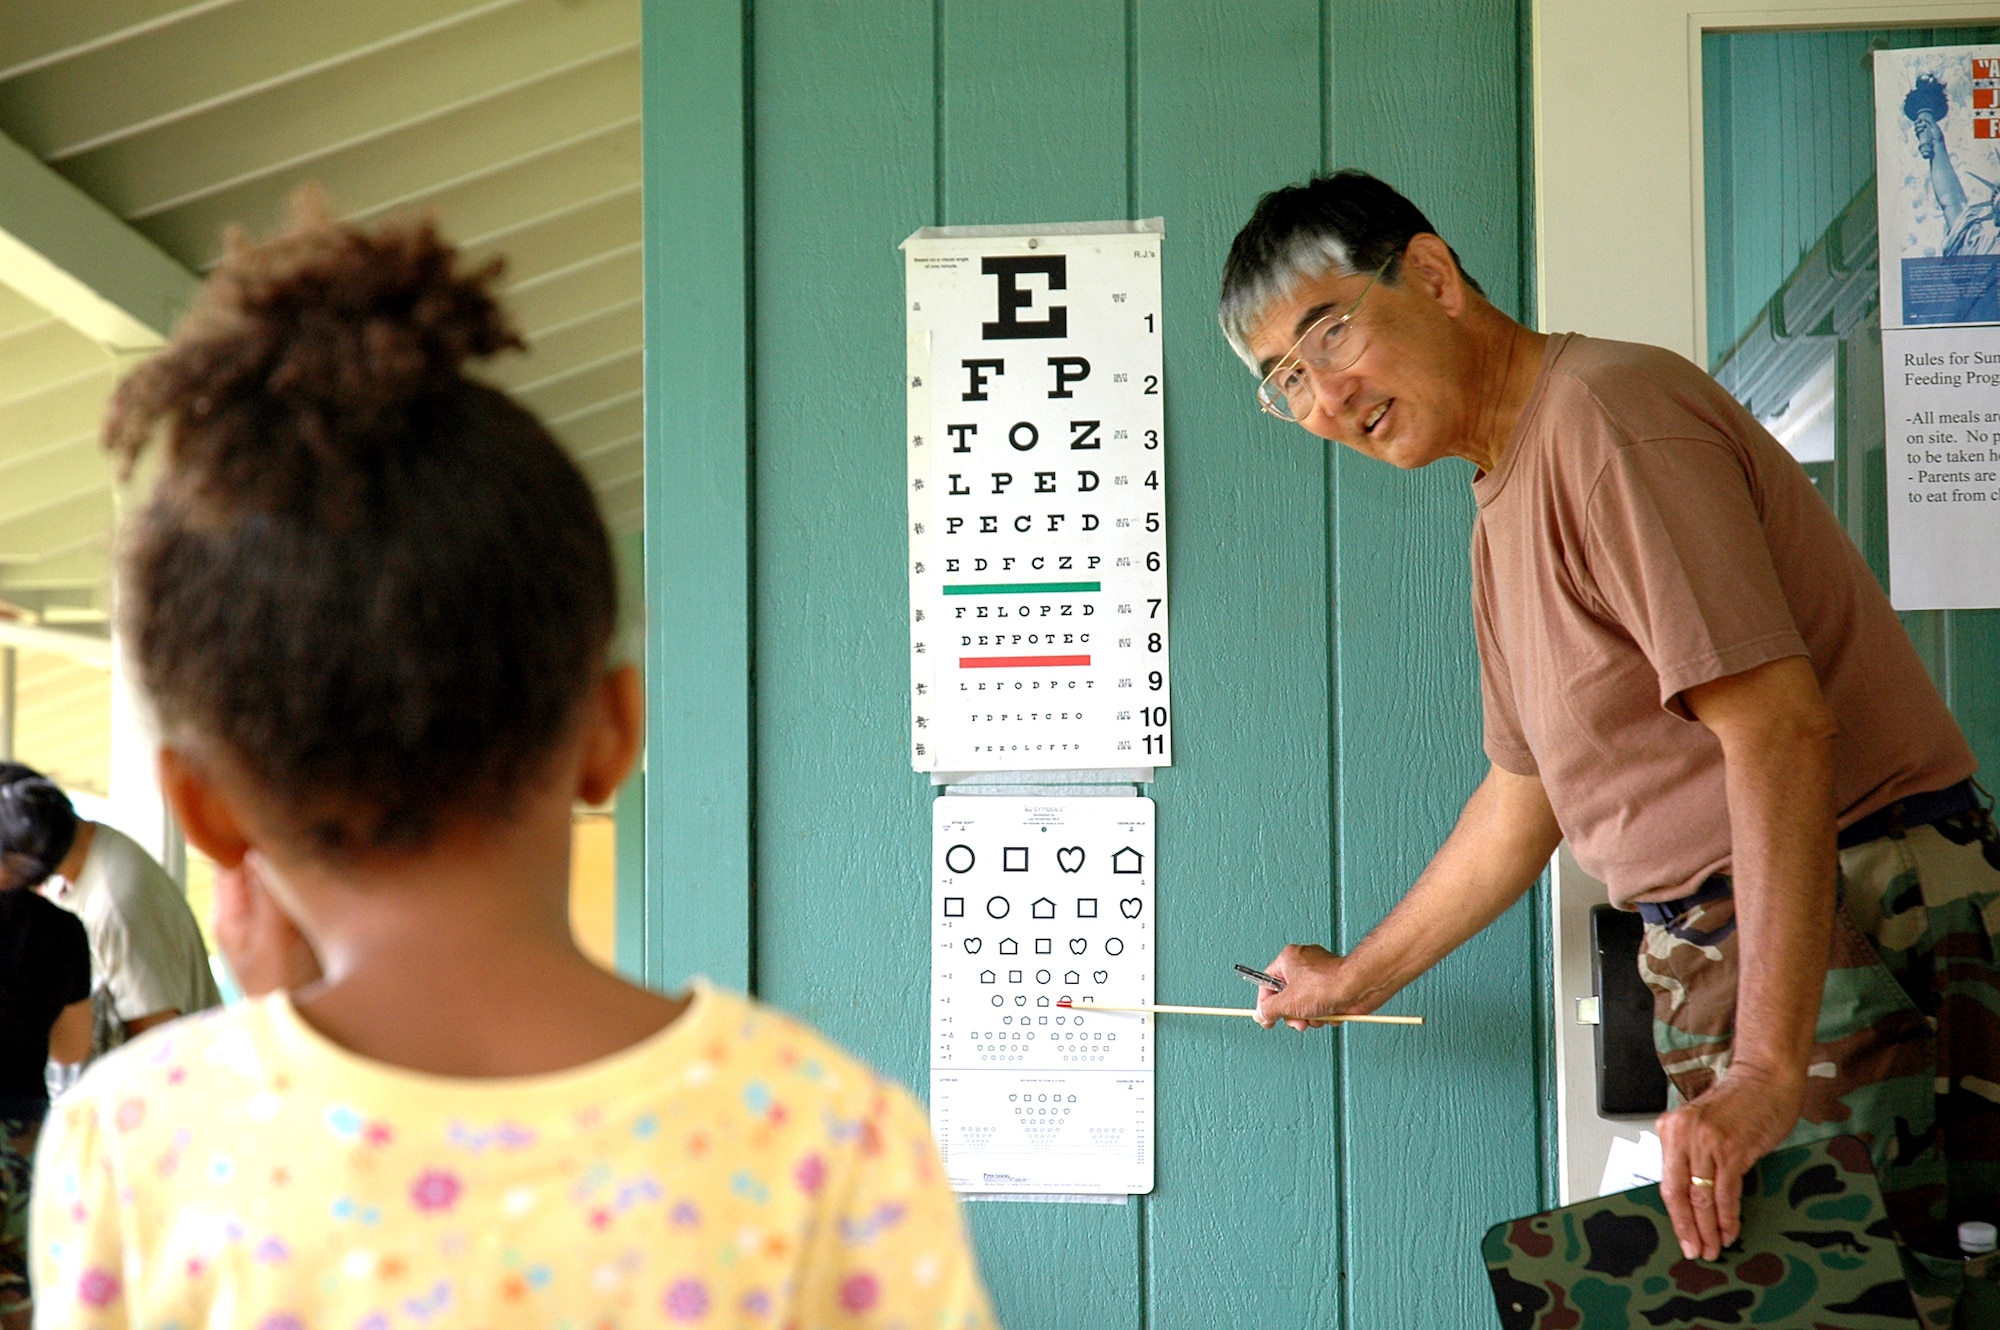 Master Sgt. Alan Yoneshige, 154th Medical Group, optometry technician, administers an eye exam to a young girl during Hawaii Medical Innovative Readiness Training July 16, in Waianae, Hawaii. Innovative Readiness Training is designed to give Guard members an opportunity to complete mission essential training while addressing community and civic needs. (U.S. Air Force photo/Tech. Sgt. Betty J. Squatrito-Martin)